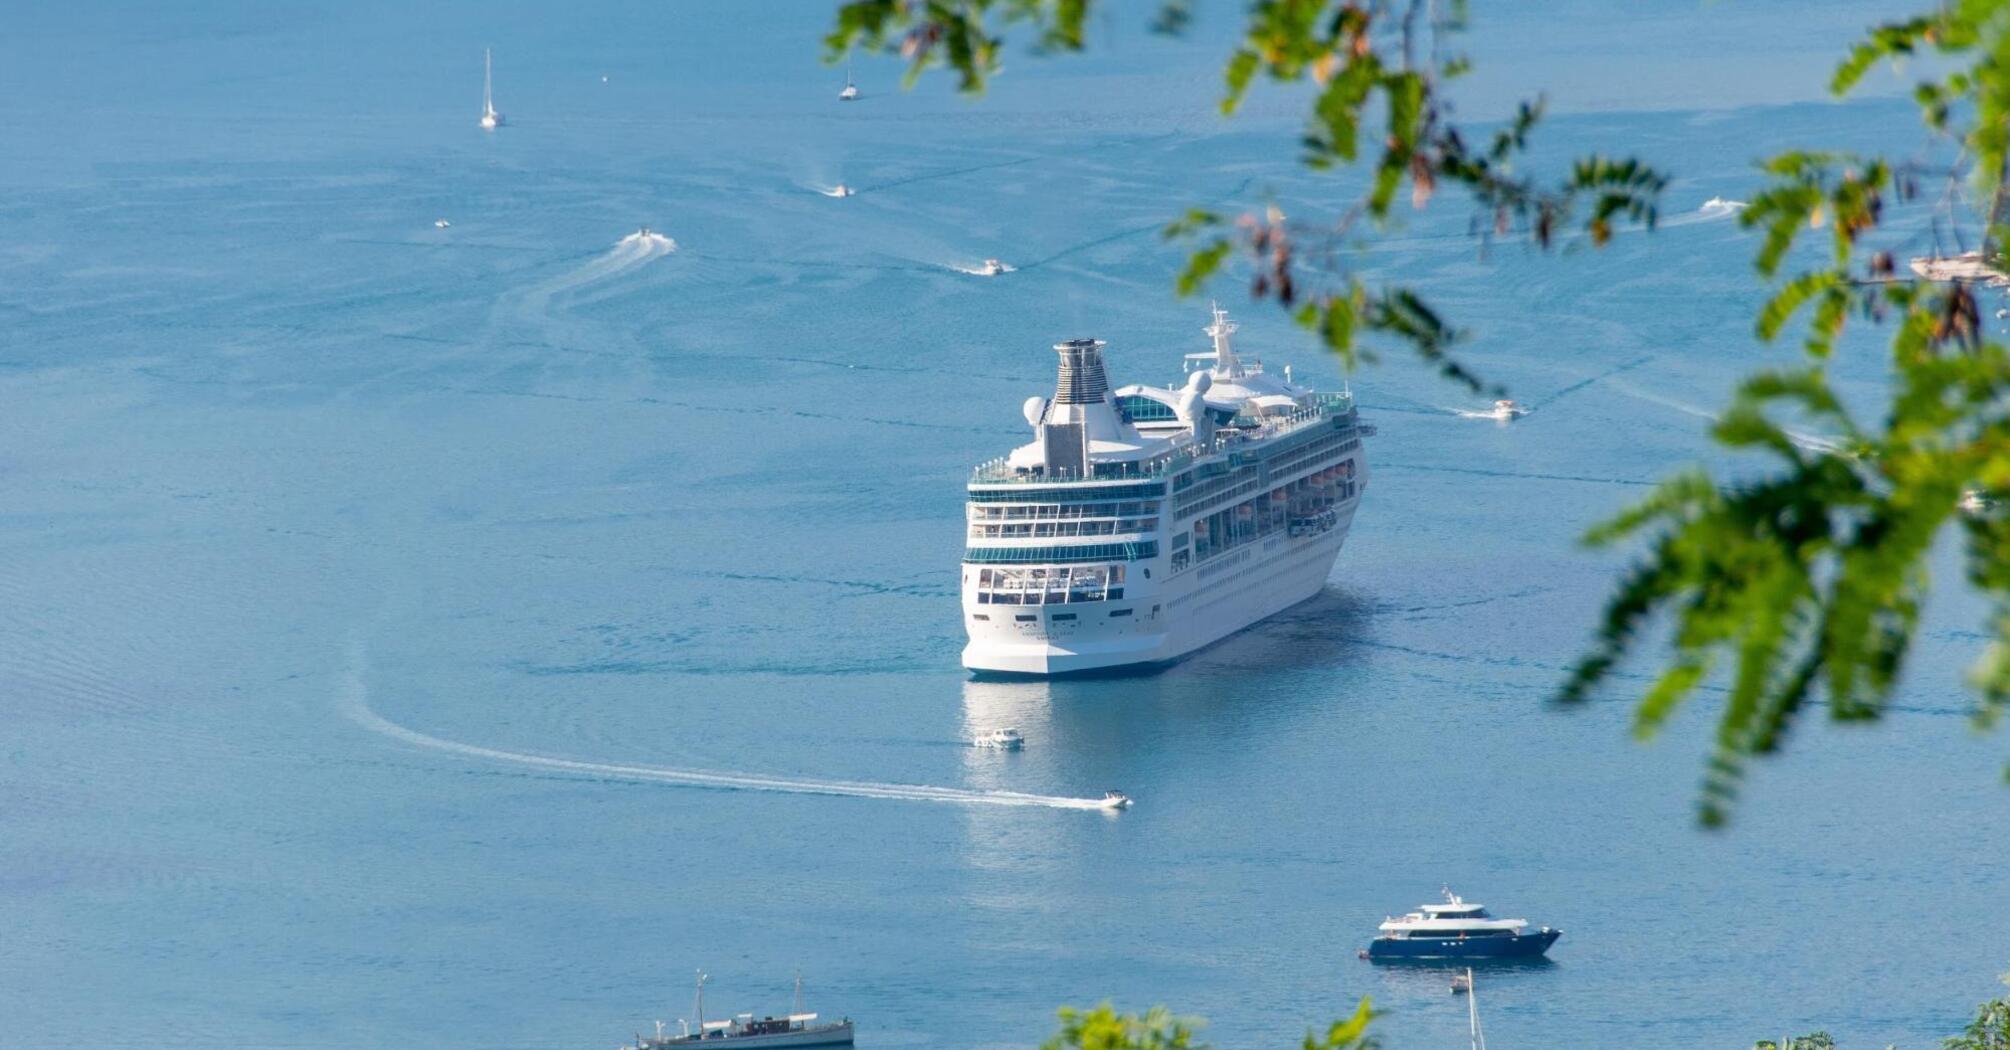 A large cruise ship sails through calm waters, surrounded by small yachts and boats